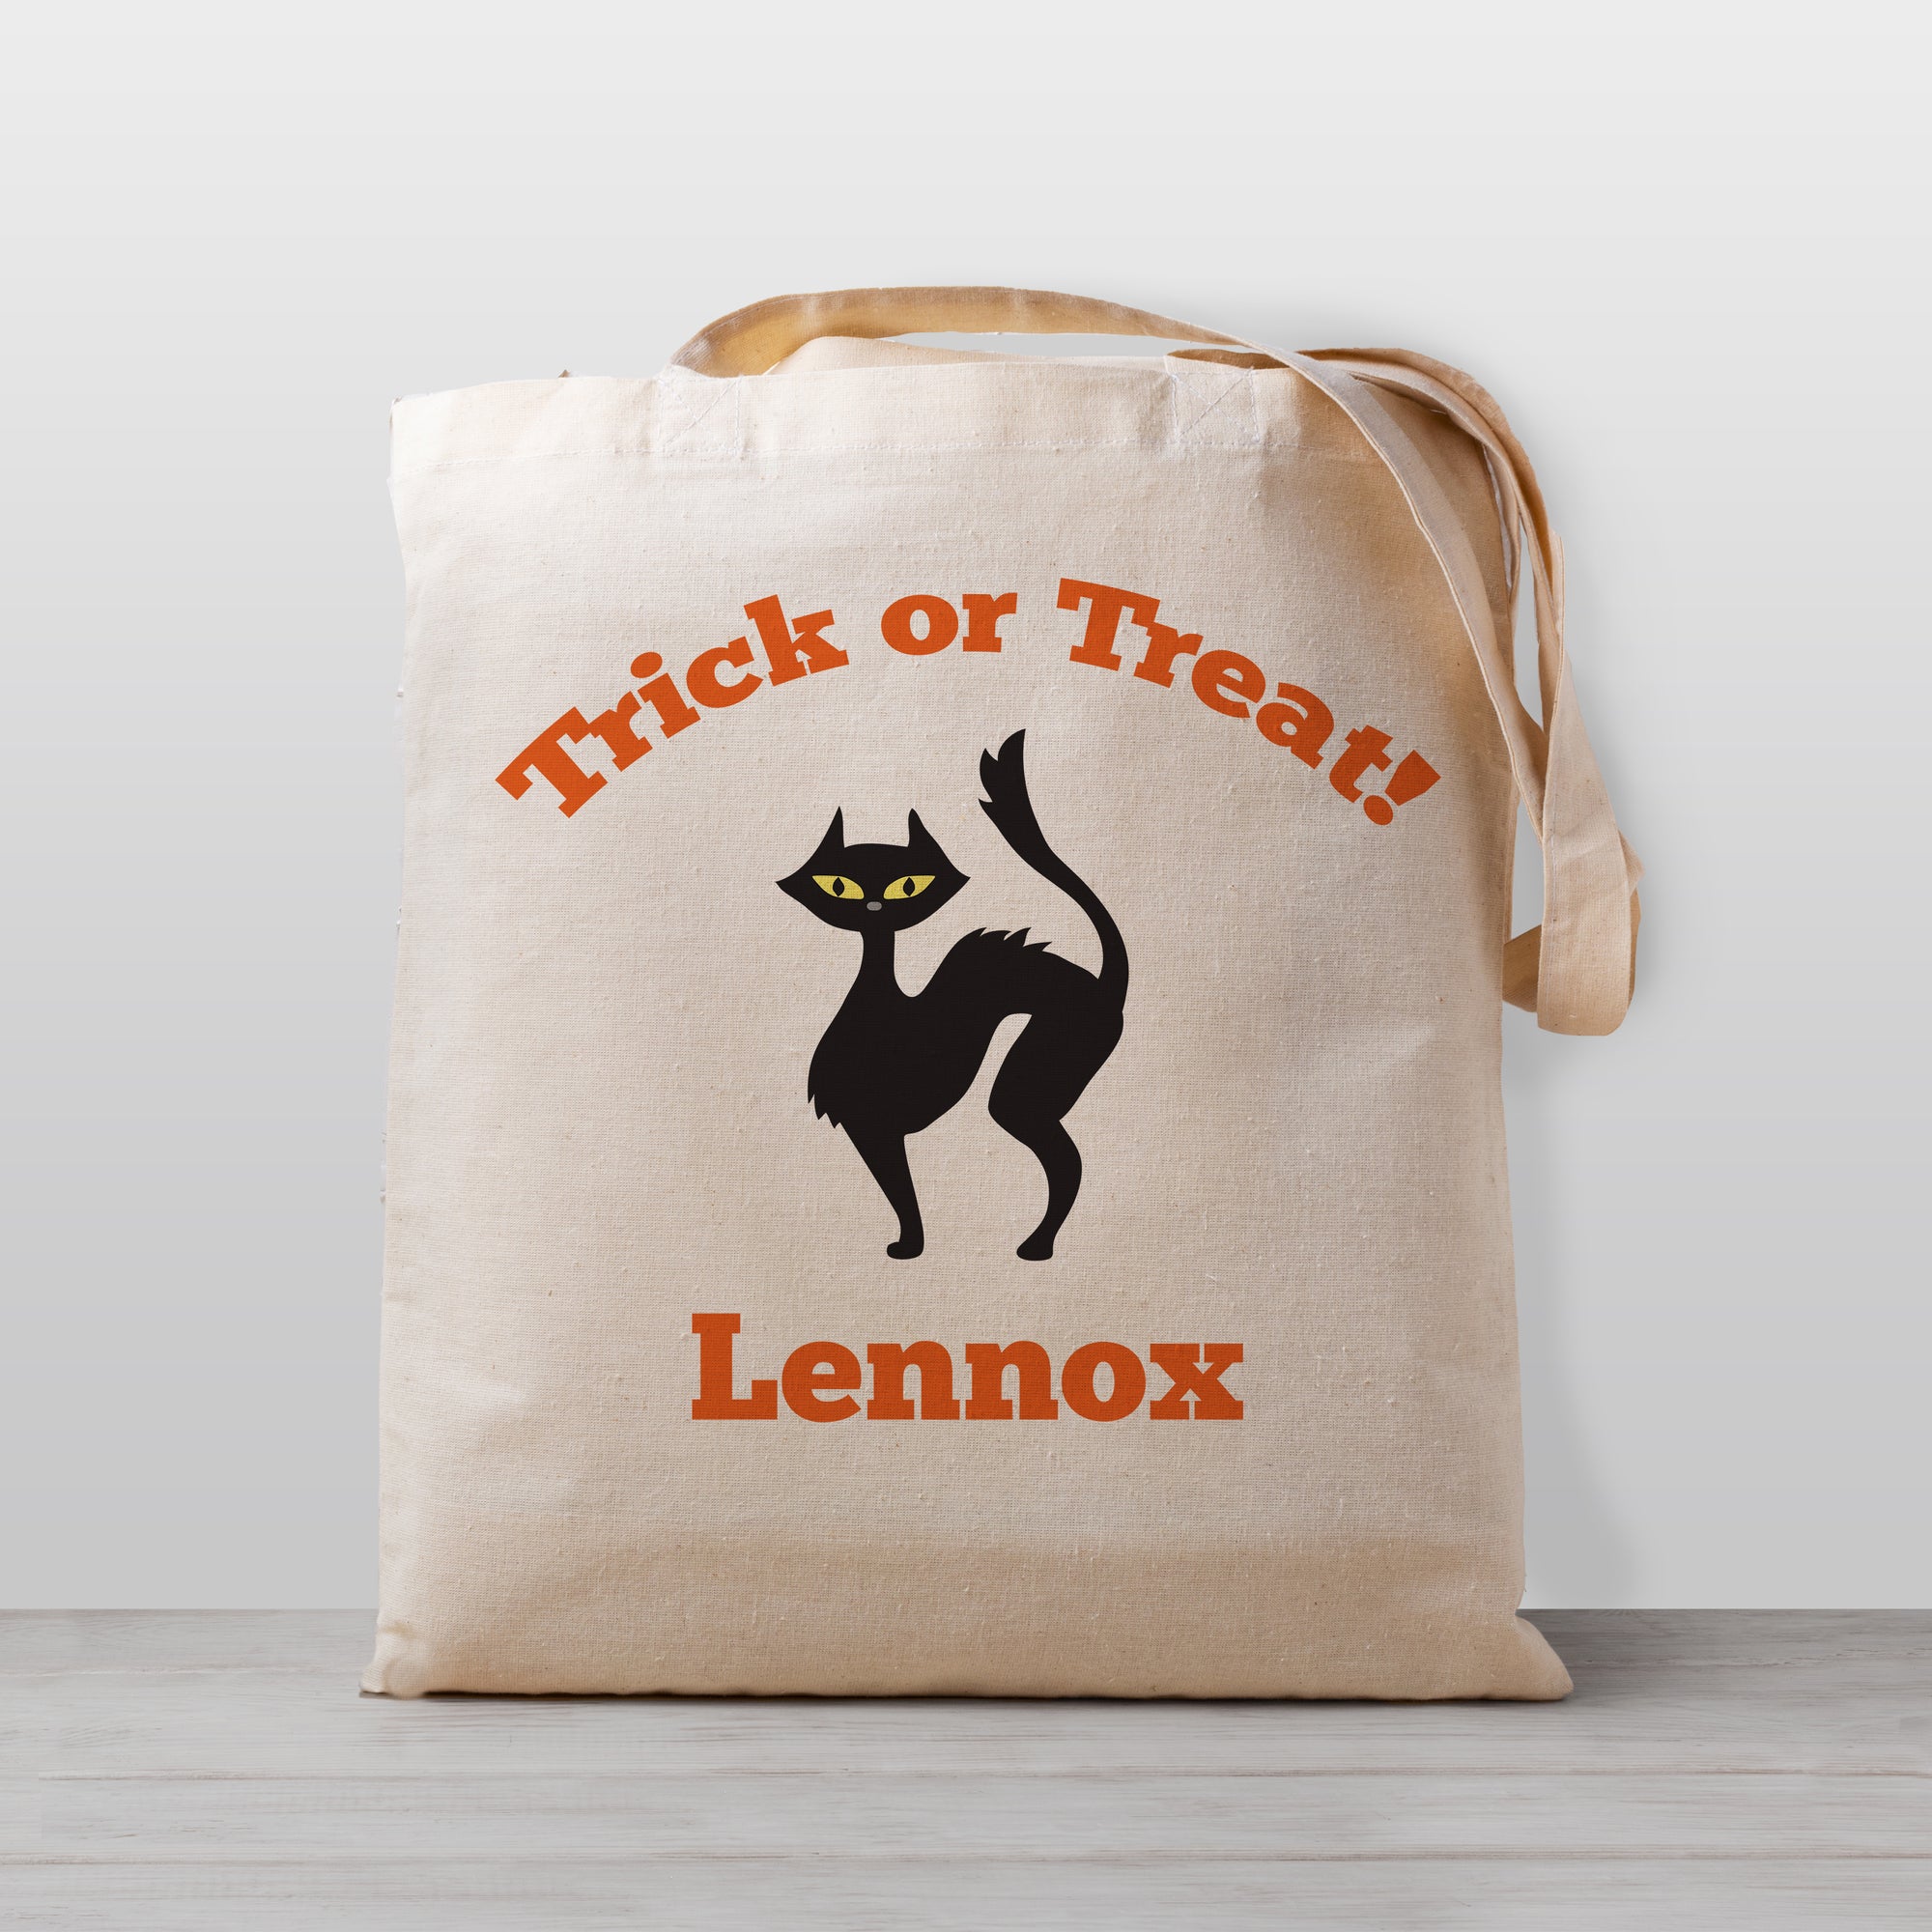 Personalized Halloween Trick or Treat Bag with a Black Cat, 100% natural cotton canvas tote